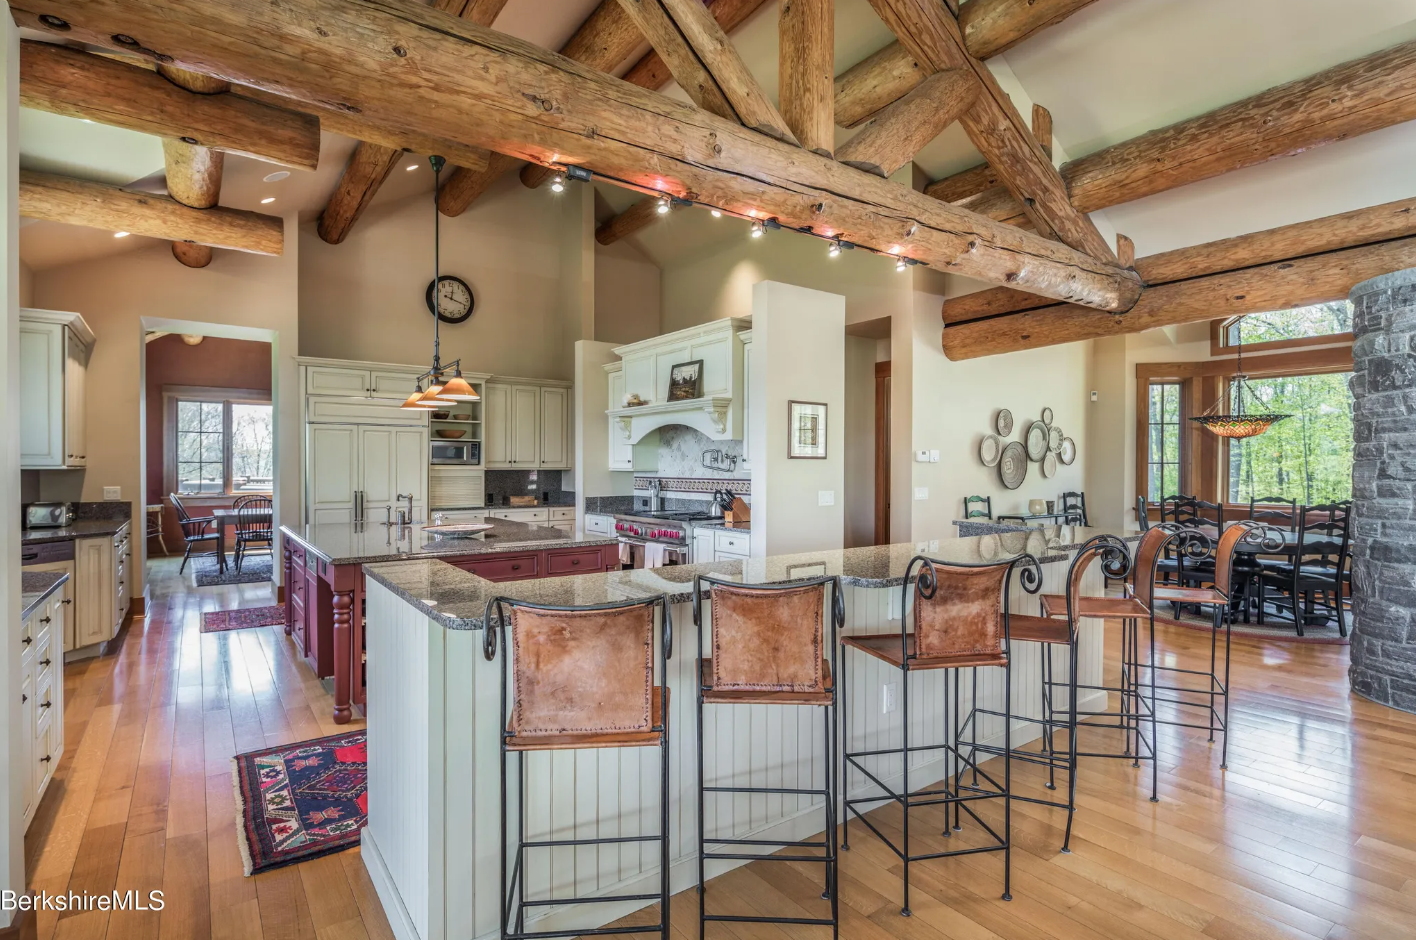 Kitchen with cream-colored beaded cabinetry, vaulted ceilings with exposed wood beams, a breakfast bar with seating for six, and stainless steel appliances.